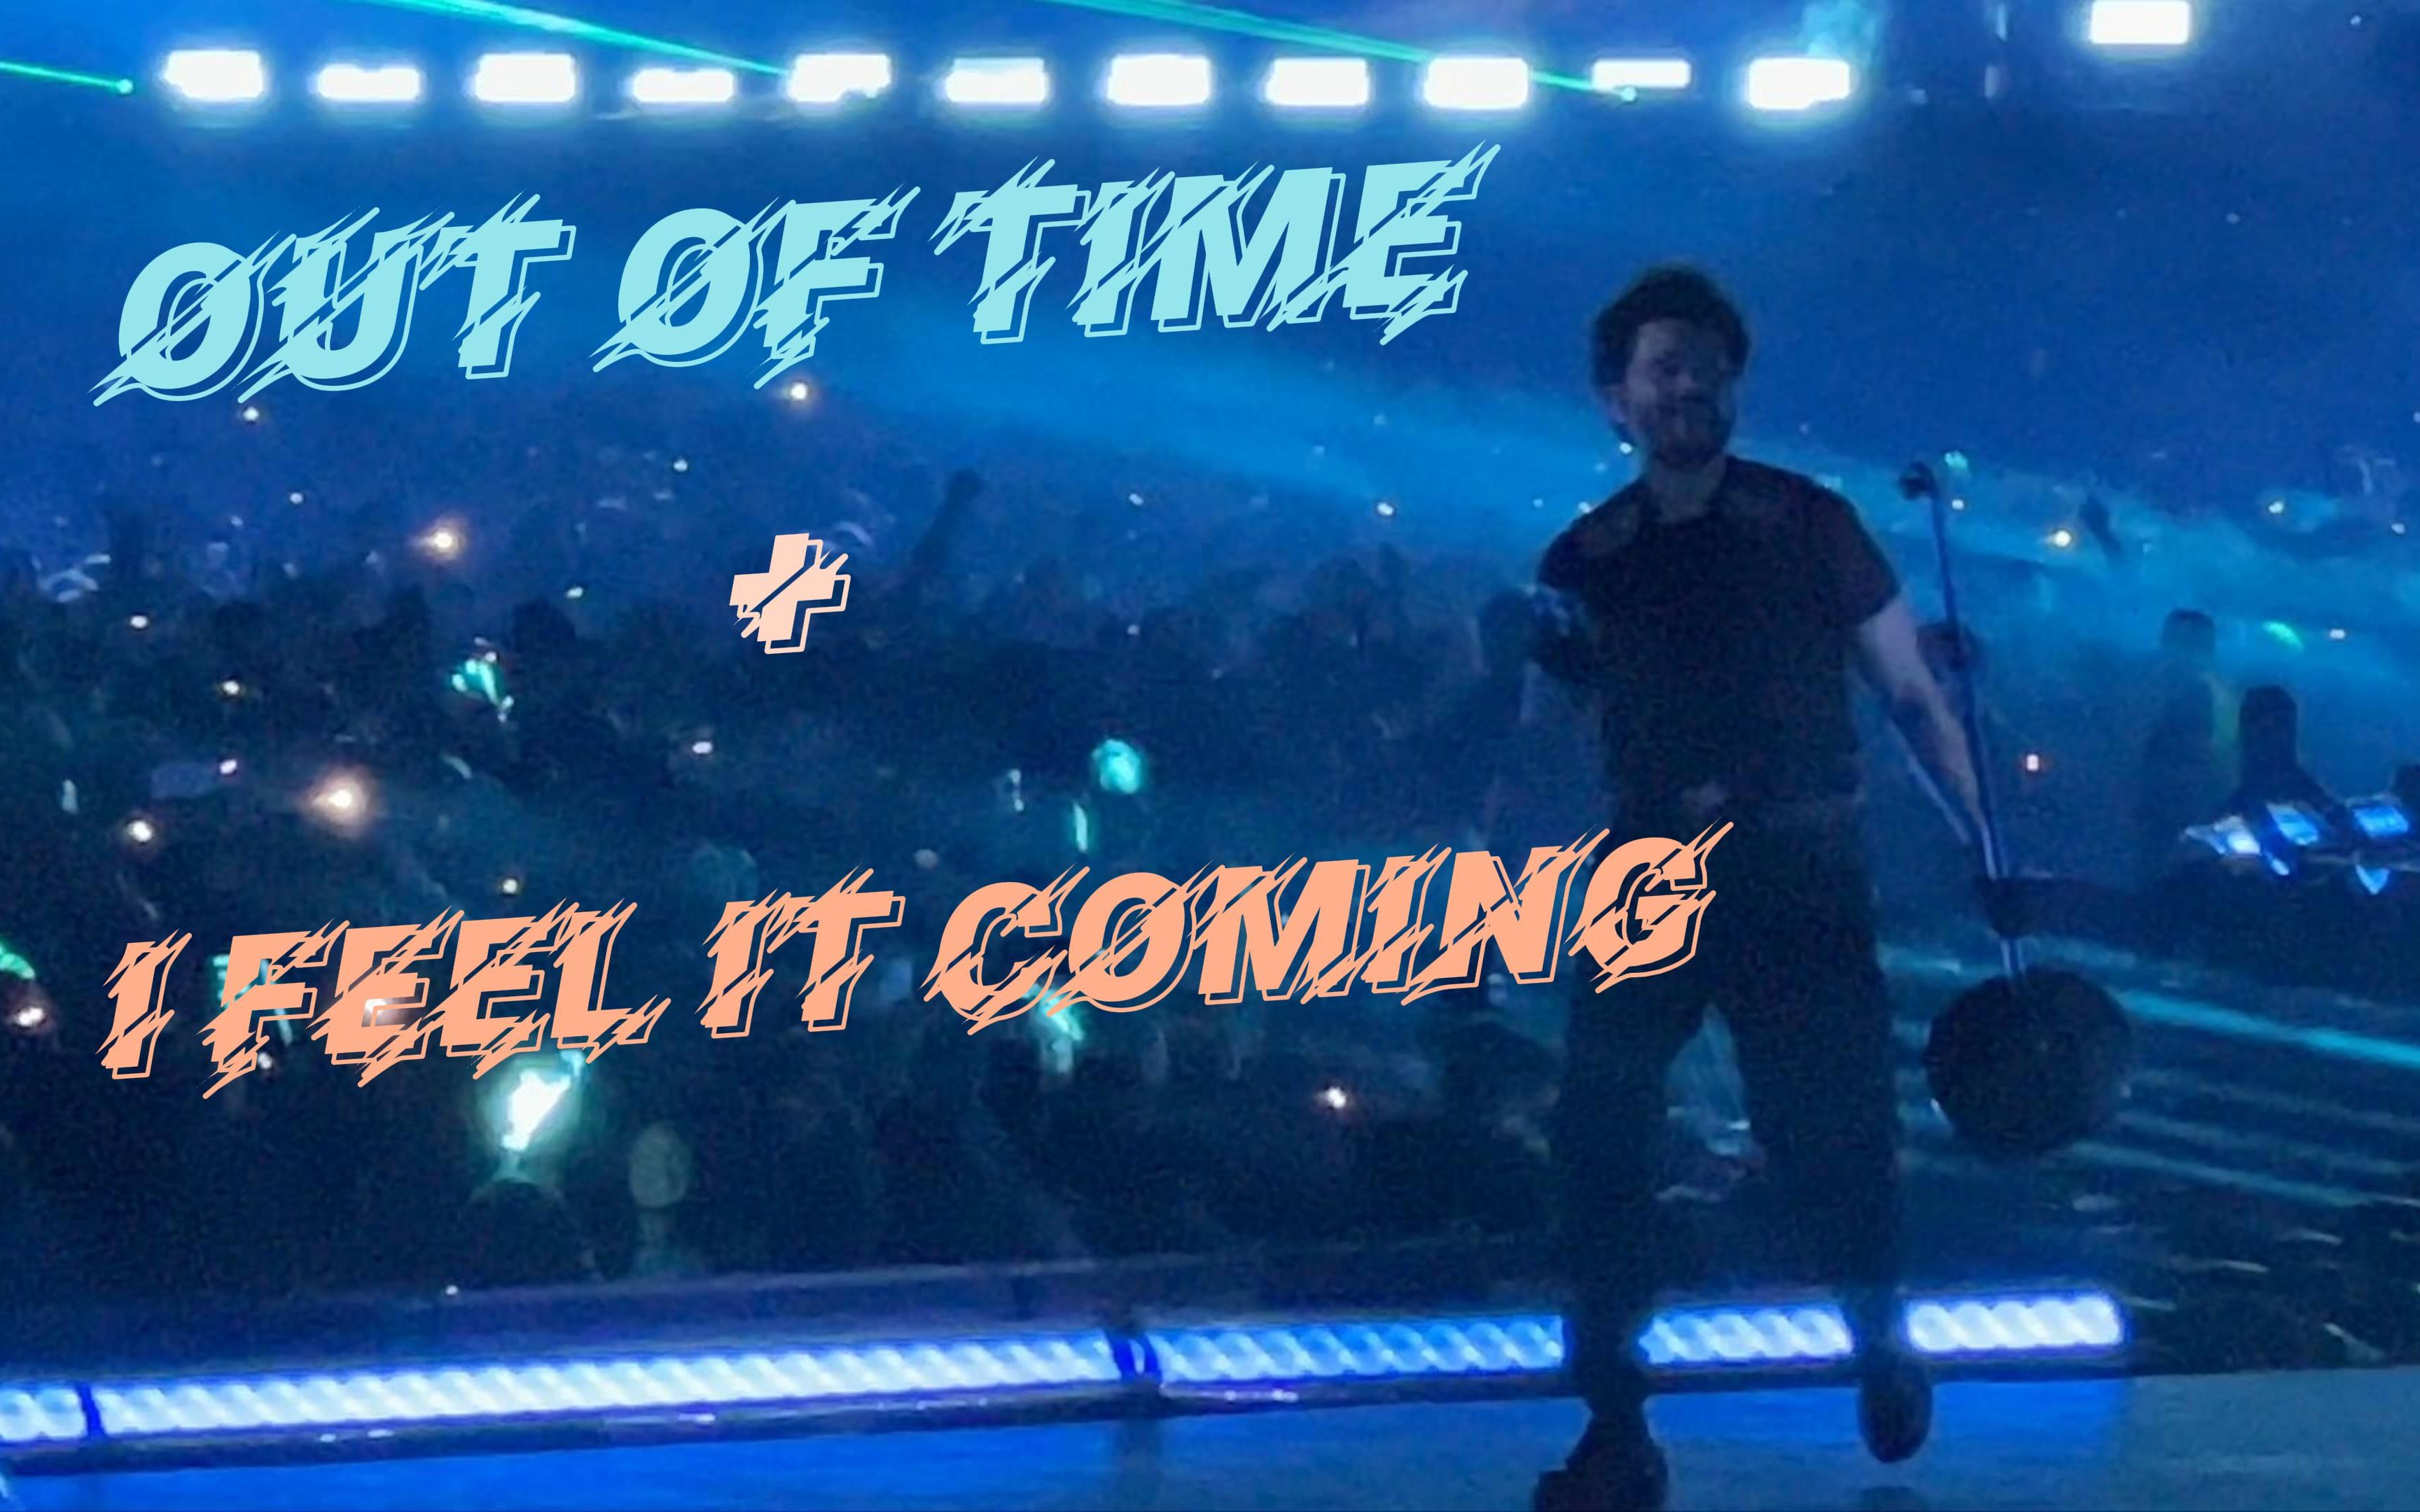 【Out of Time】【I Feel It Coming】The Weeknd 2022巡演丝滑转场，万人合唱